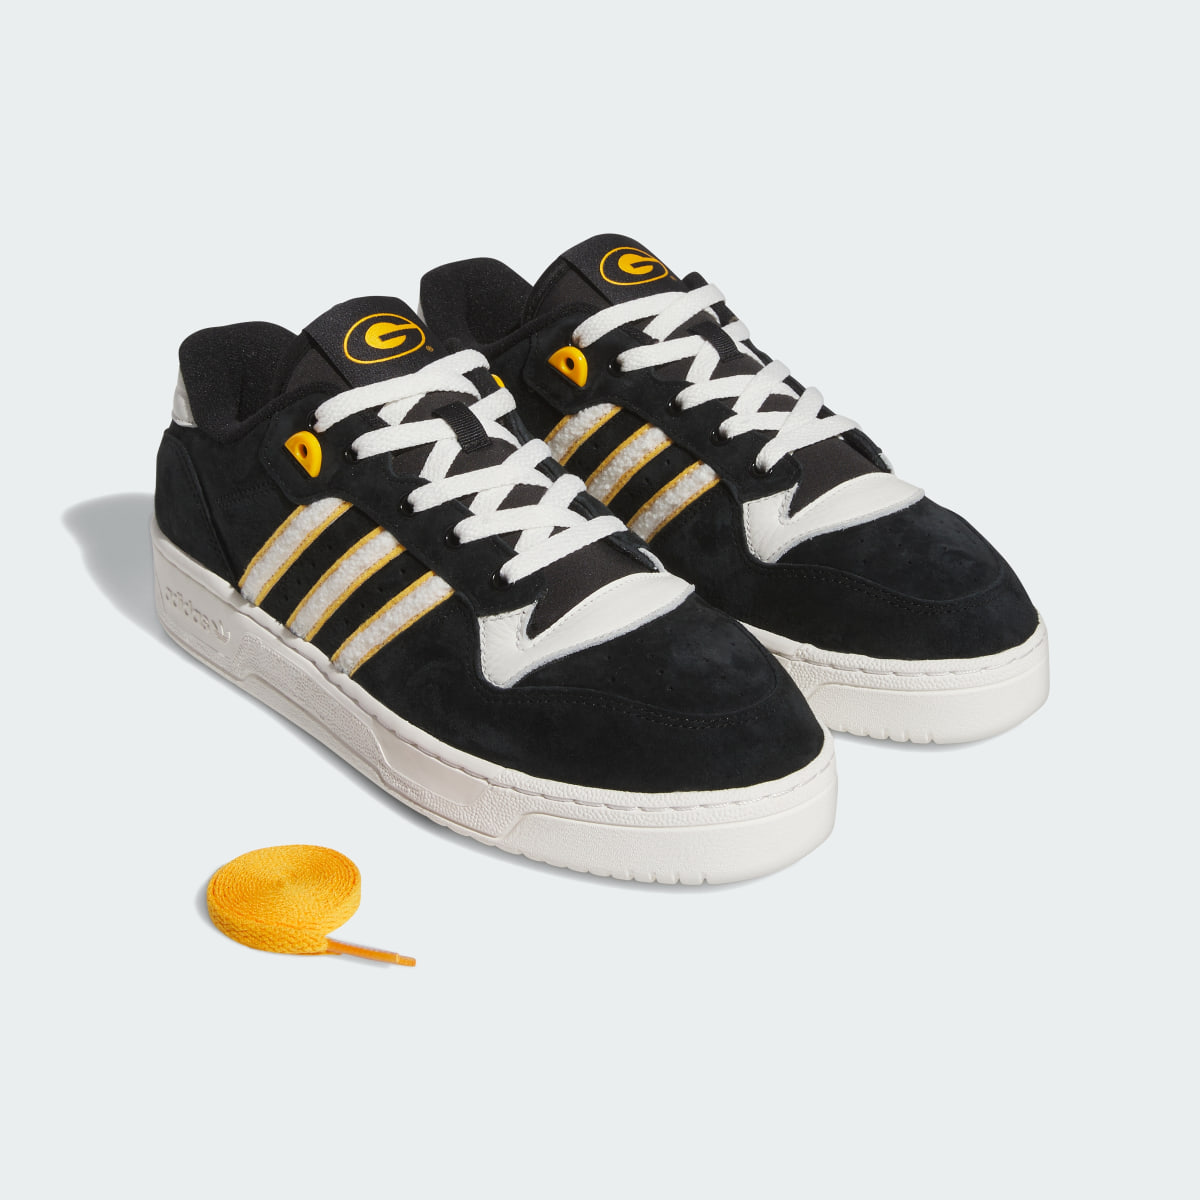 Adidas Grambling State Rivalry Low Shoes. 8